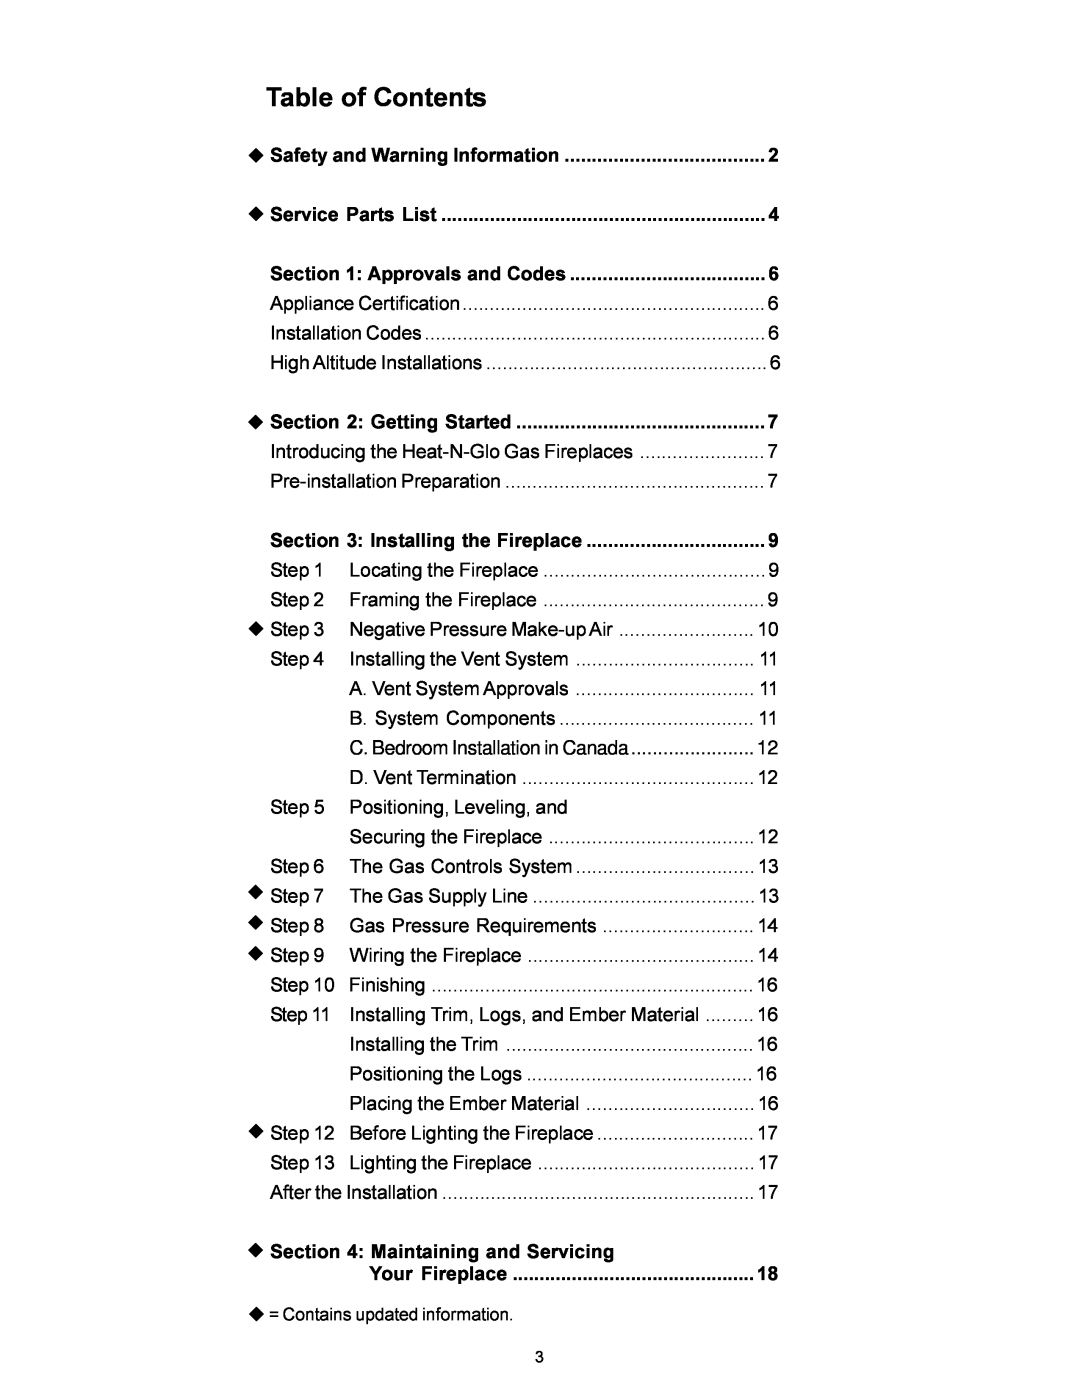 Heat & Glo LifeStyle ST-38GTV manual Table of Contents 